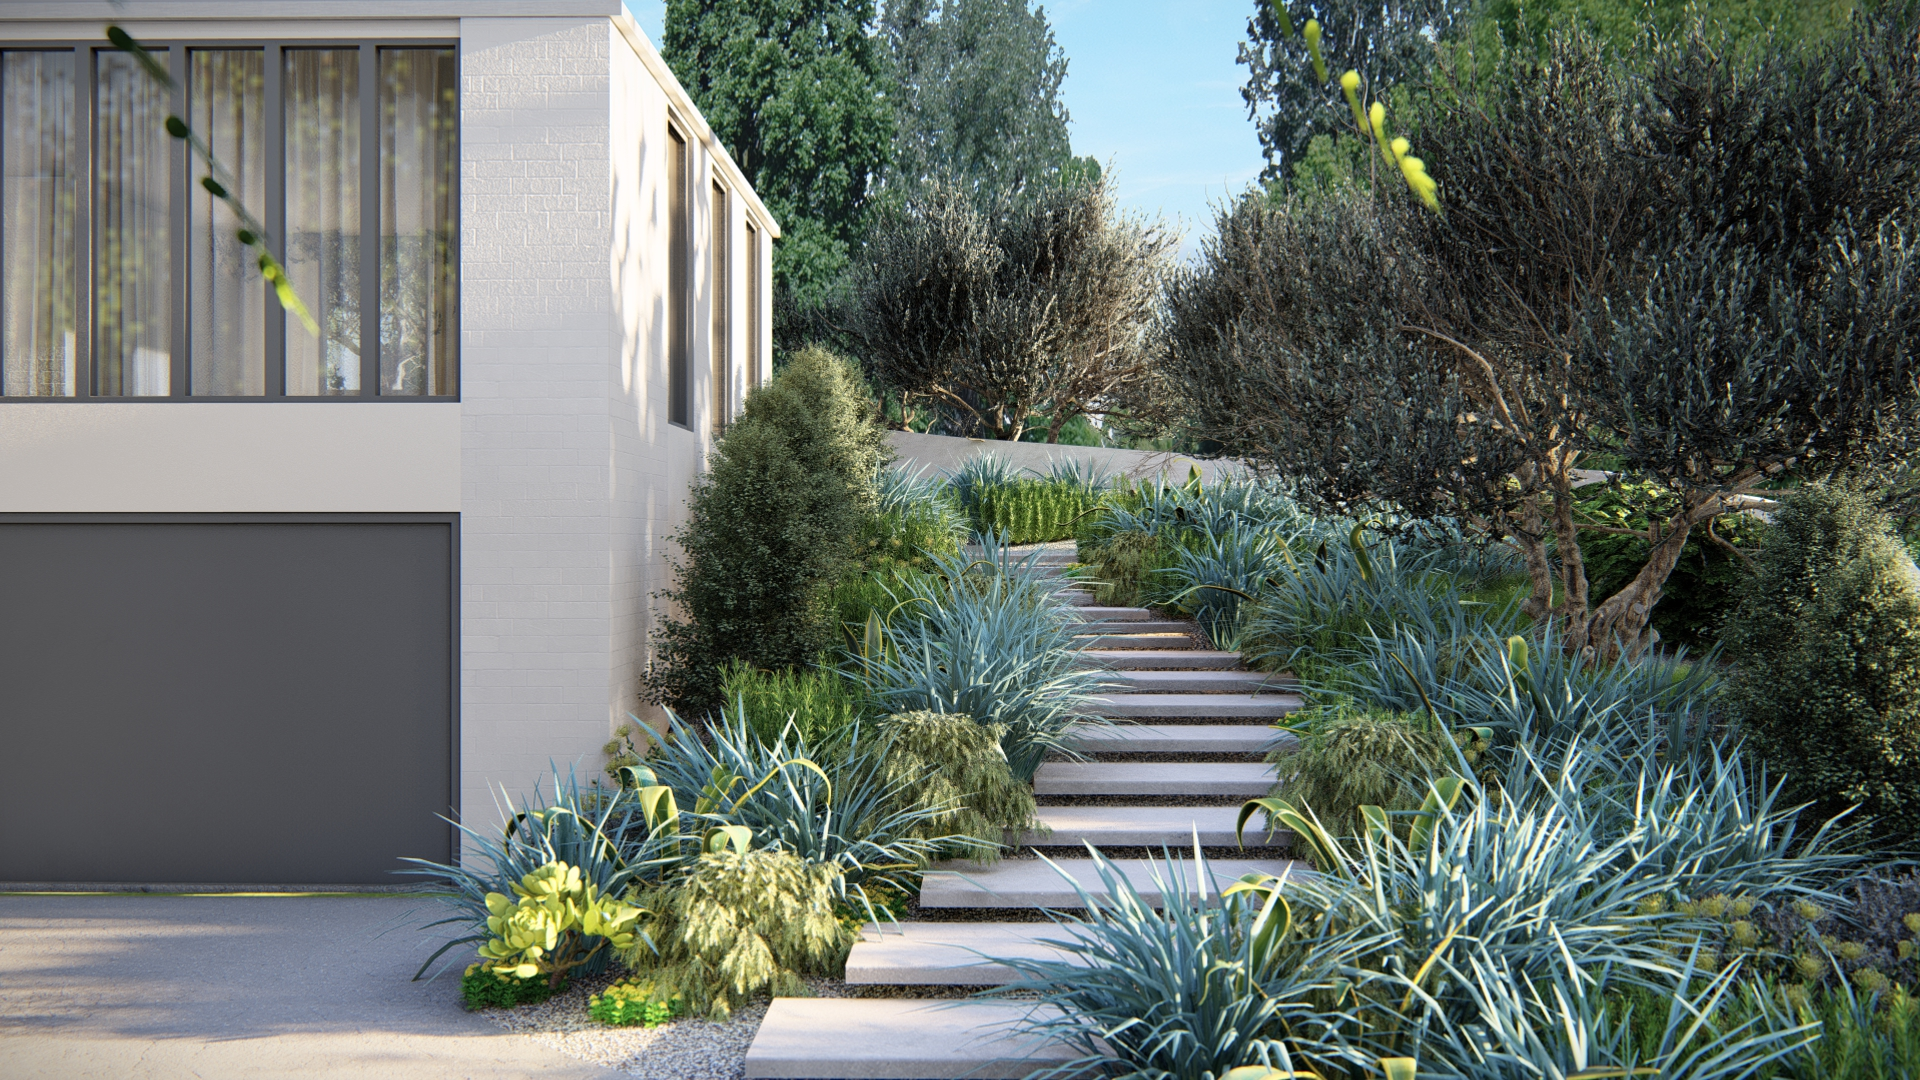 Gorgeous concrete steps with lush plantings of succulents and grasses surrounding